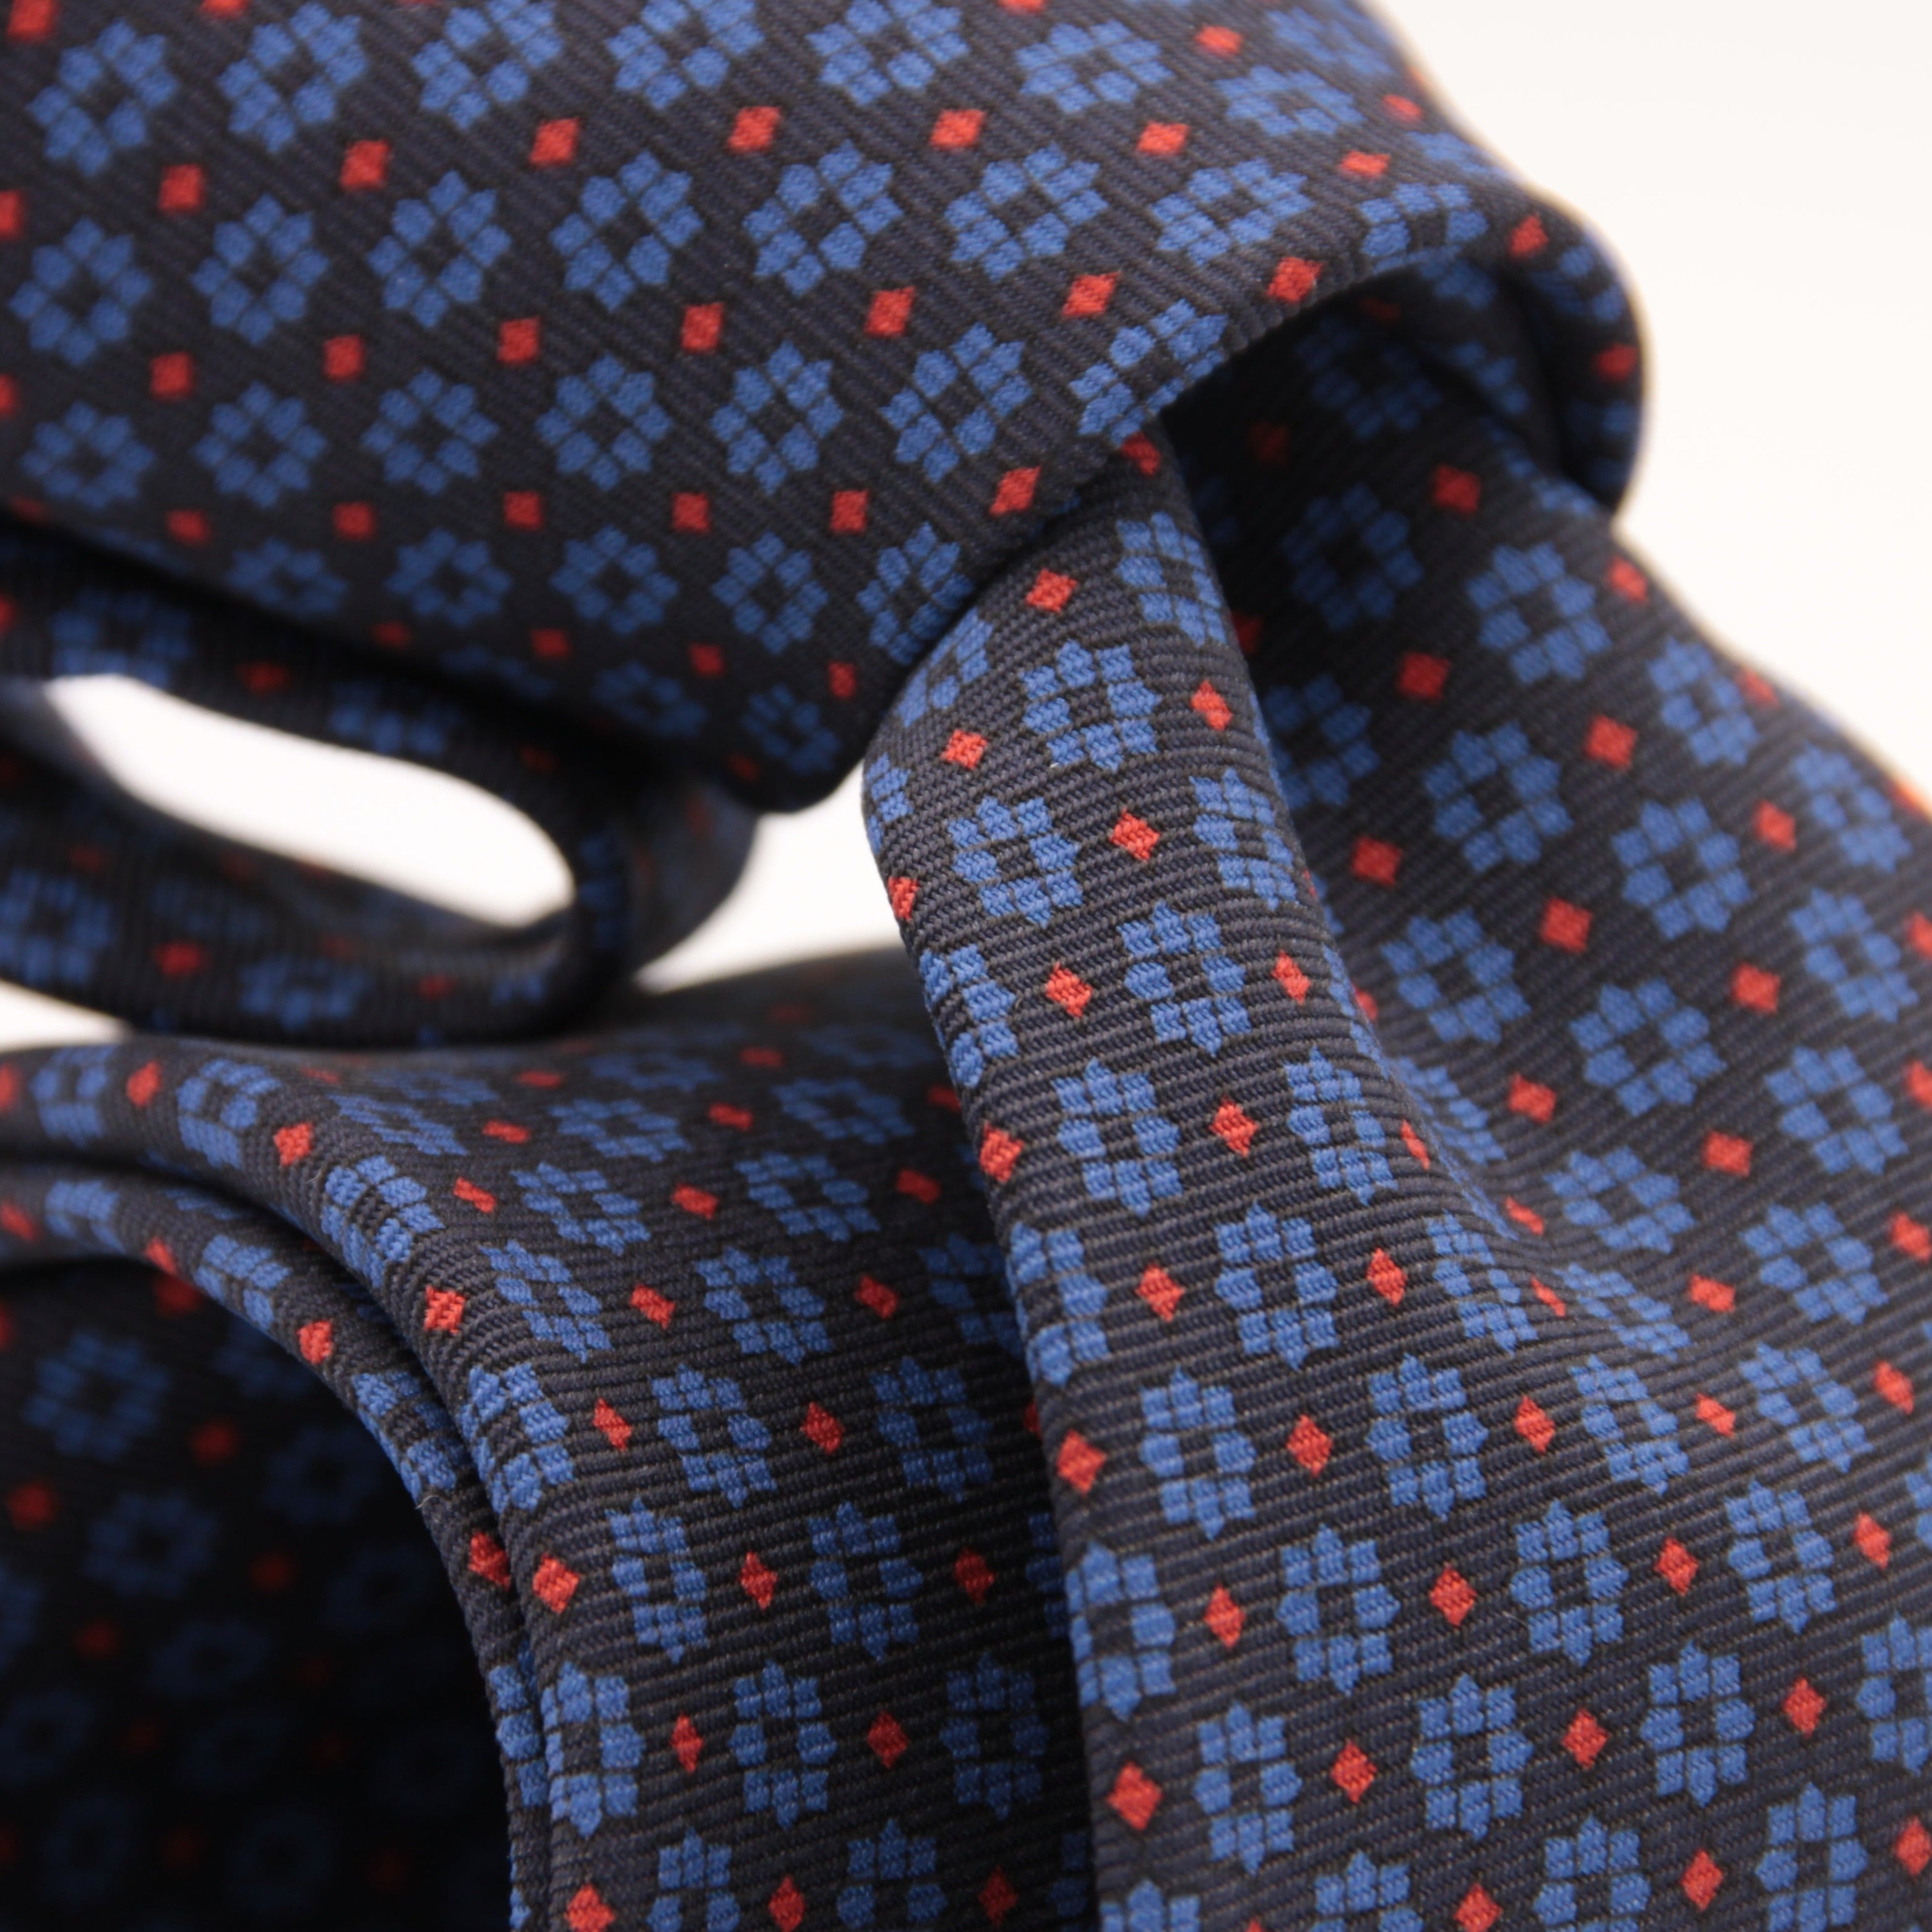 Holliday & Brown for Cruciani & Bella 100% printed Silk Self tipped Blue, Brown and Red motif tie Handmade in Italy 8 cm x 150 cm 5040